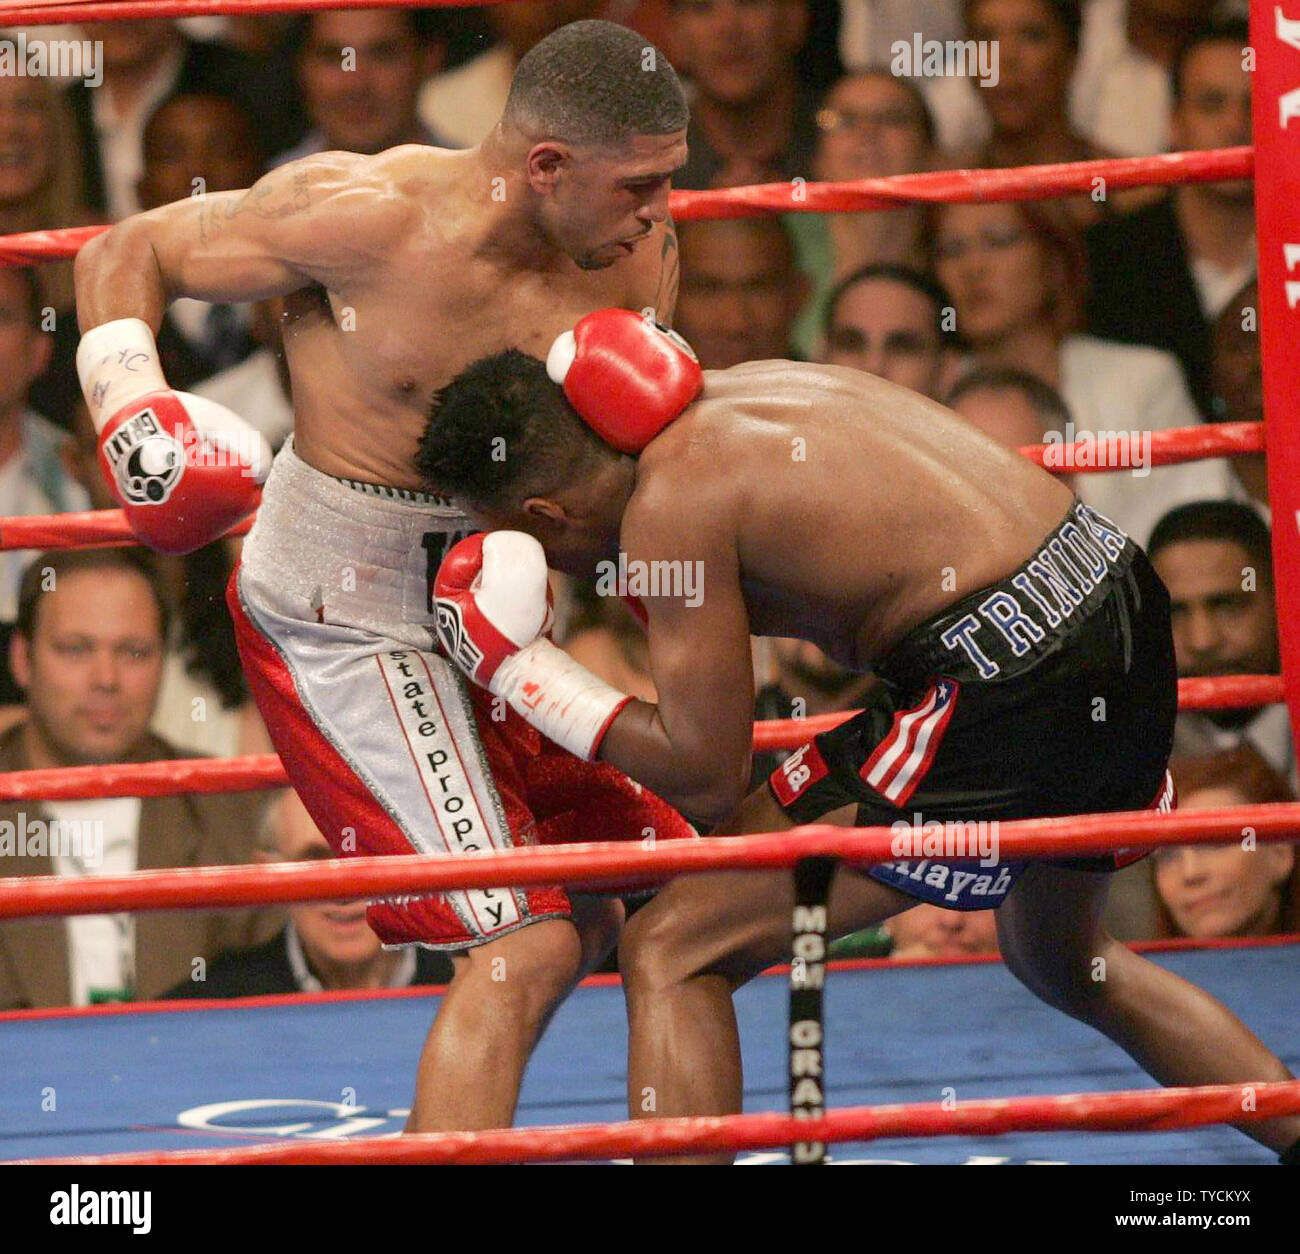 Undisputed Jr. Middleweight Champion of the World, Ronald "Winky" Wright (L) of St. Petersburg FL grapples with former multiple weight champion Tito Trinidad of Puerto Rico in a 12 round decision at MGM Grand in Las Vegas, May 14, 2005. Trinidad barely won a round in the fight.   (UPI Photo/Roger Williams) Stock Photo